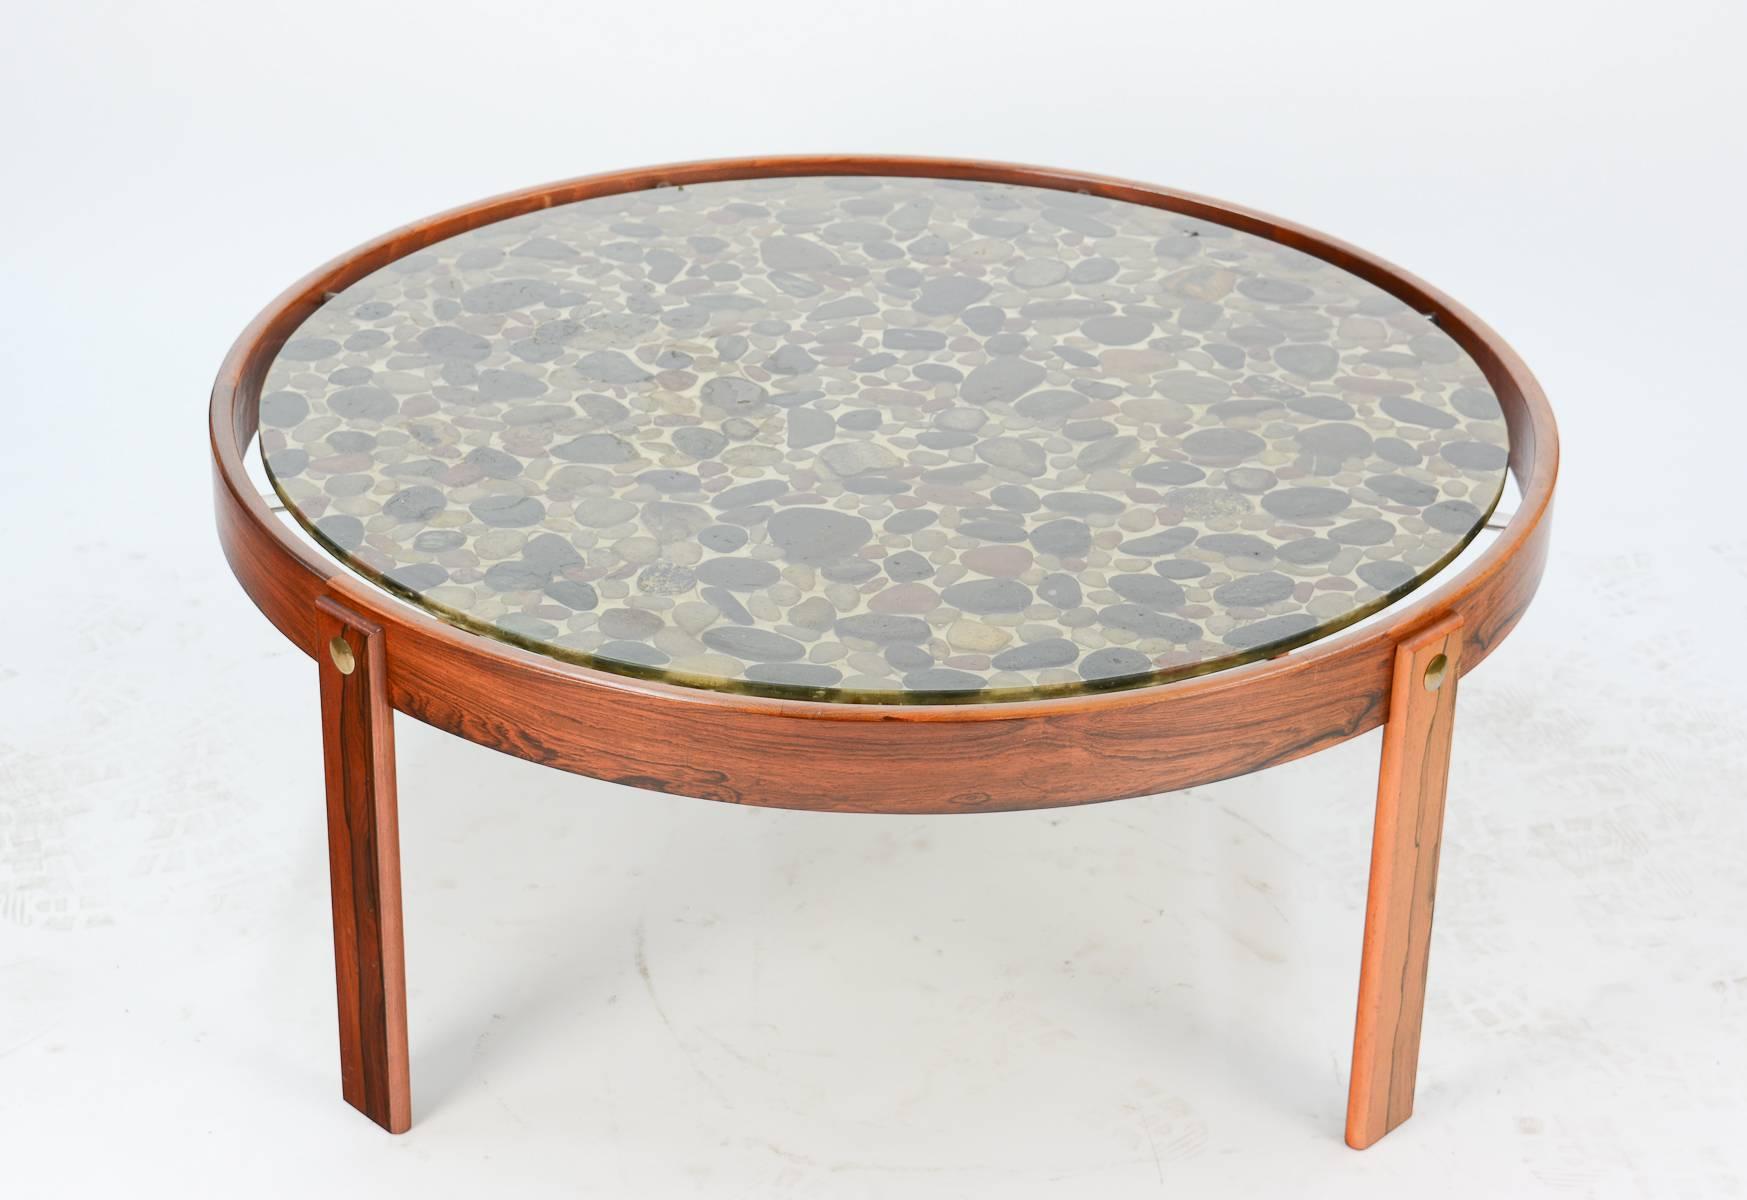 A beautifully uncommon and attention-getting Danish modern coffee table with river stones set in resin and elevated in a rosewood frame.

The floating, waterproof resin cocktail surface invokes the sensation of viewing stones at the bottom of a